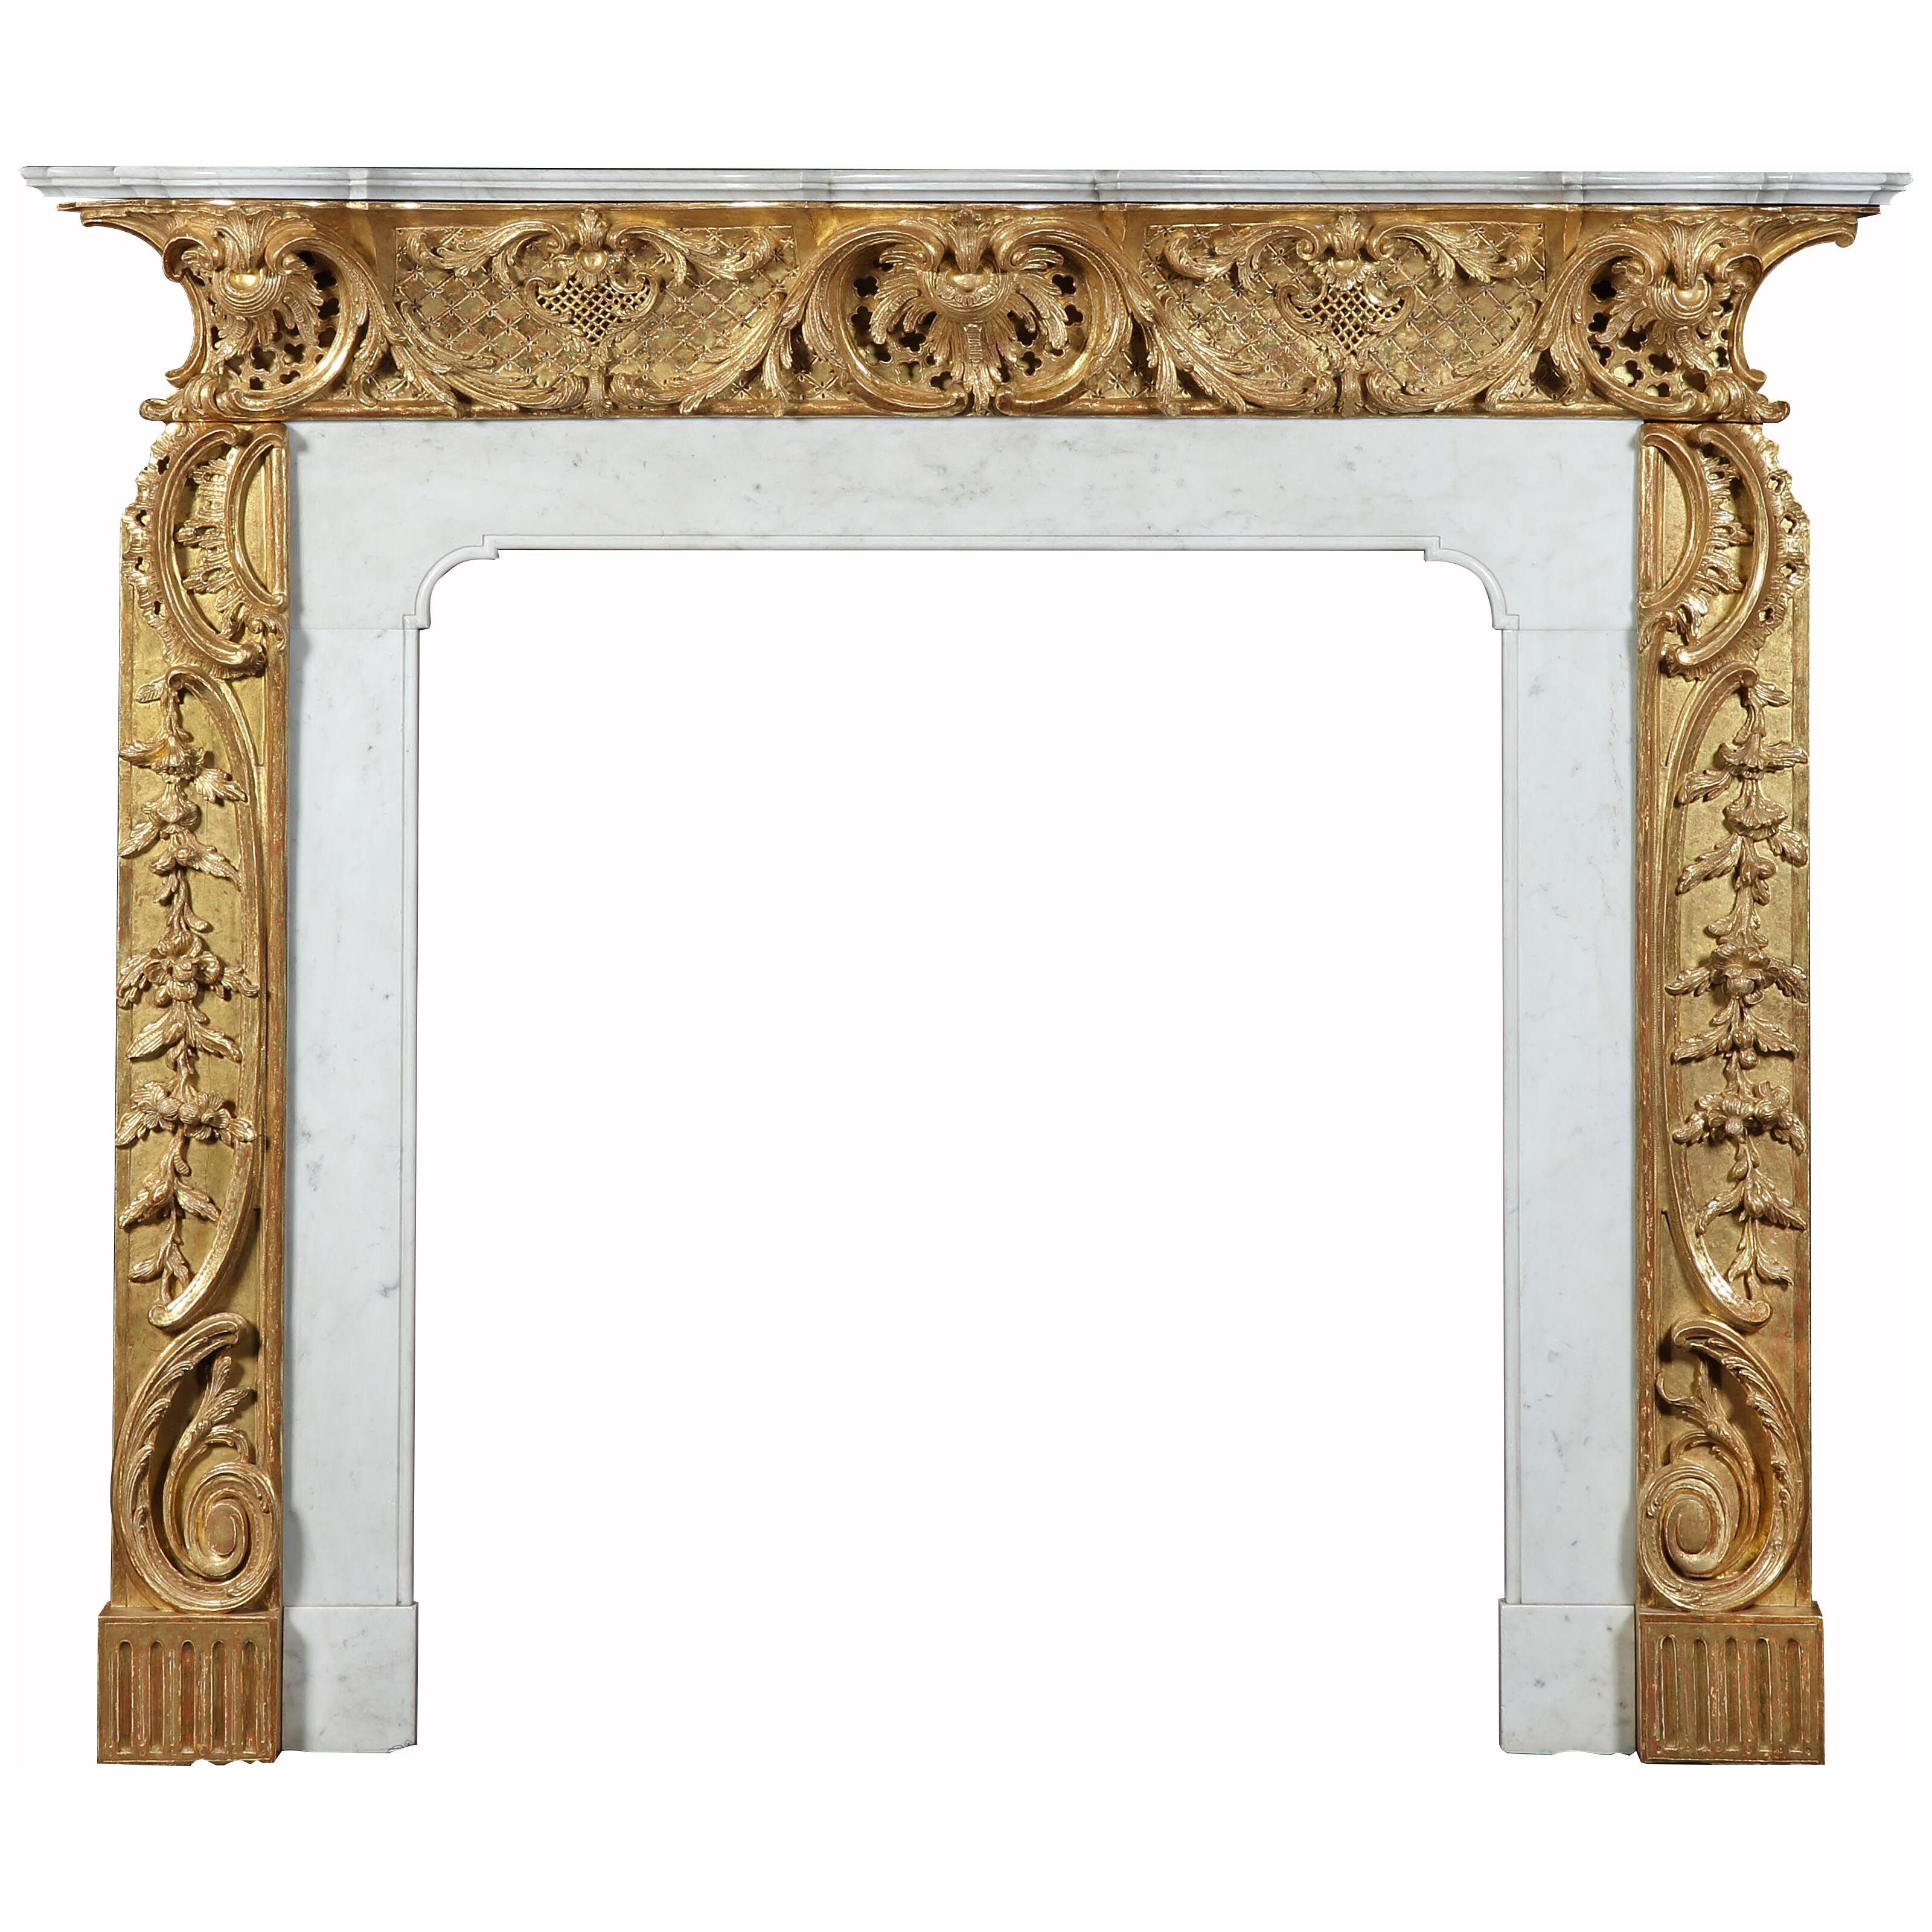 A GEORGE II GILTWOOD AND STATUARY MARBLE CHIMNEYPIECE 